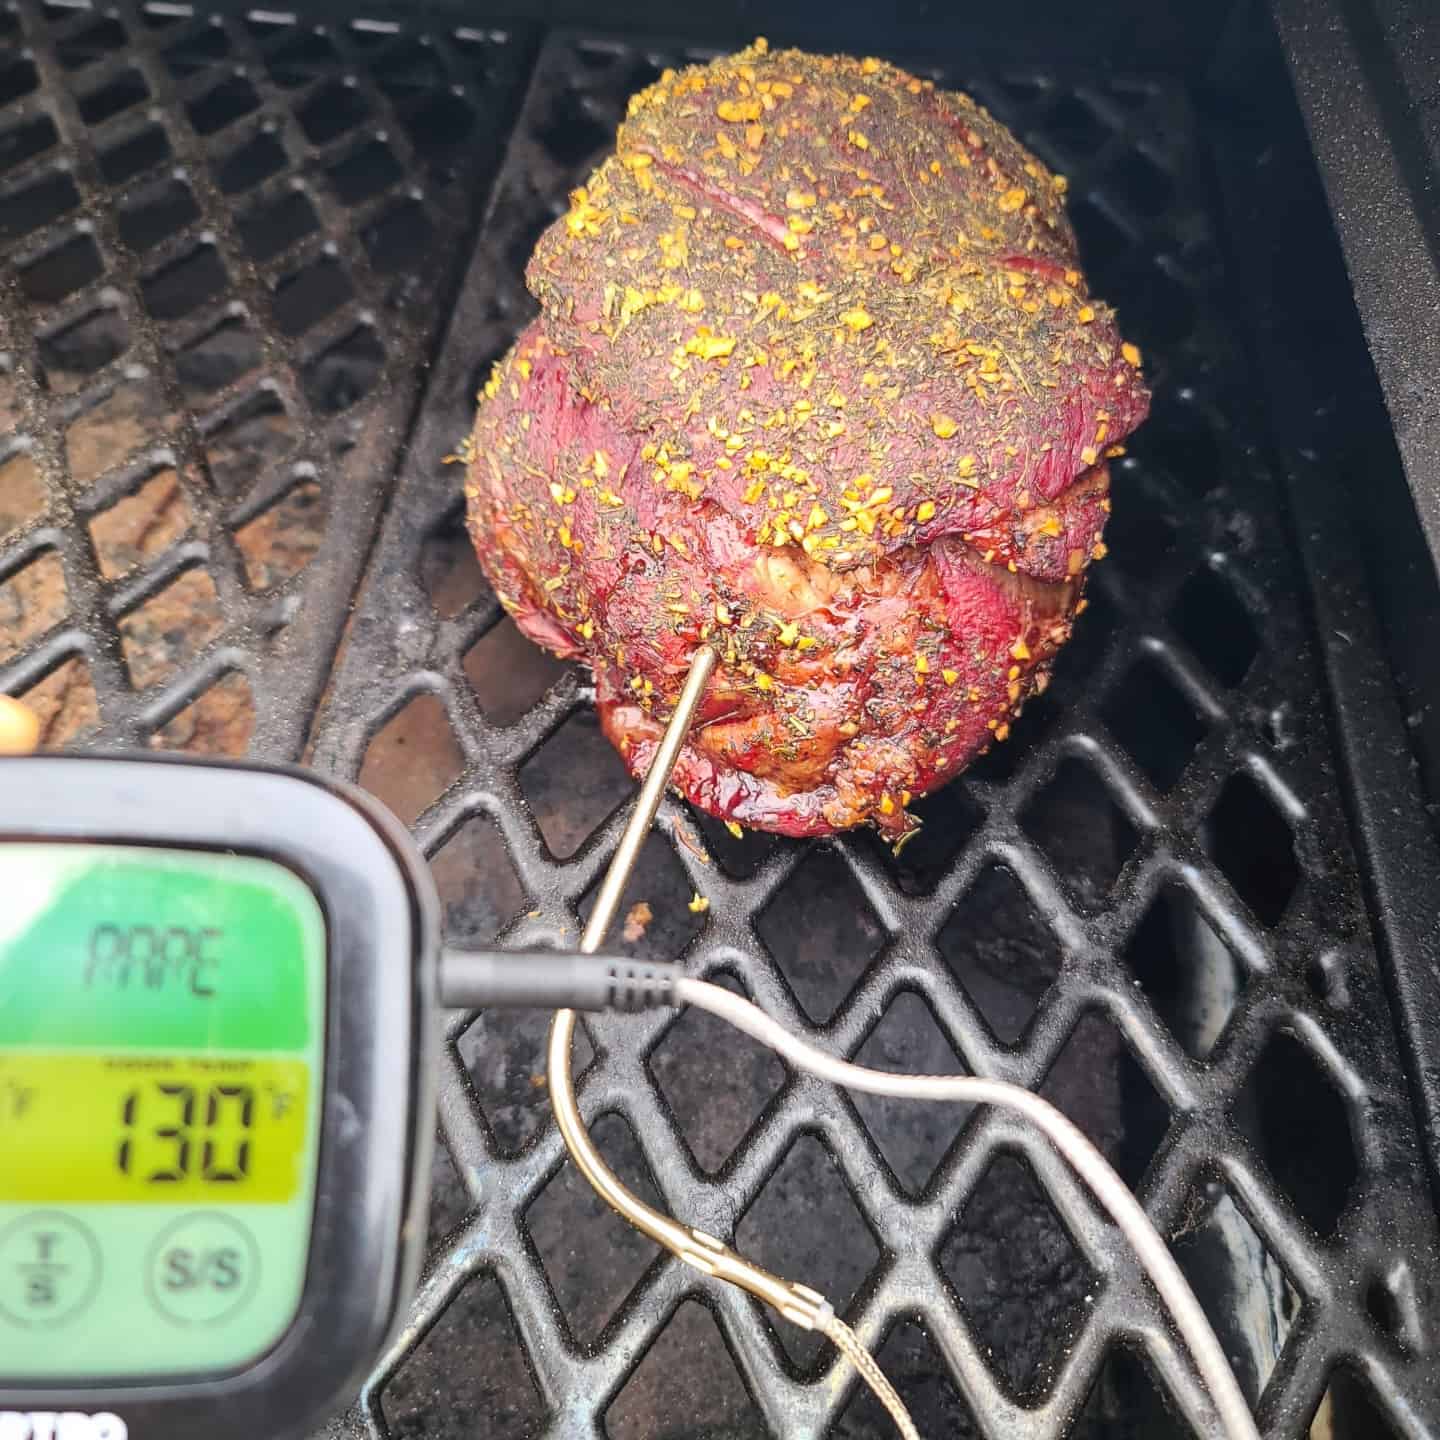 7 Smoking of the sirloin until 130 degrees F